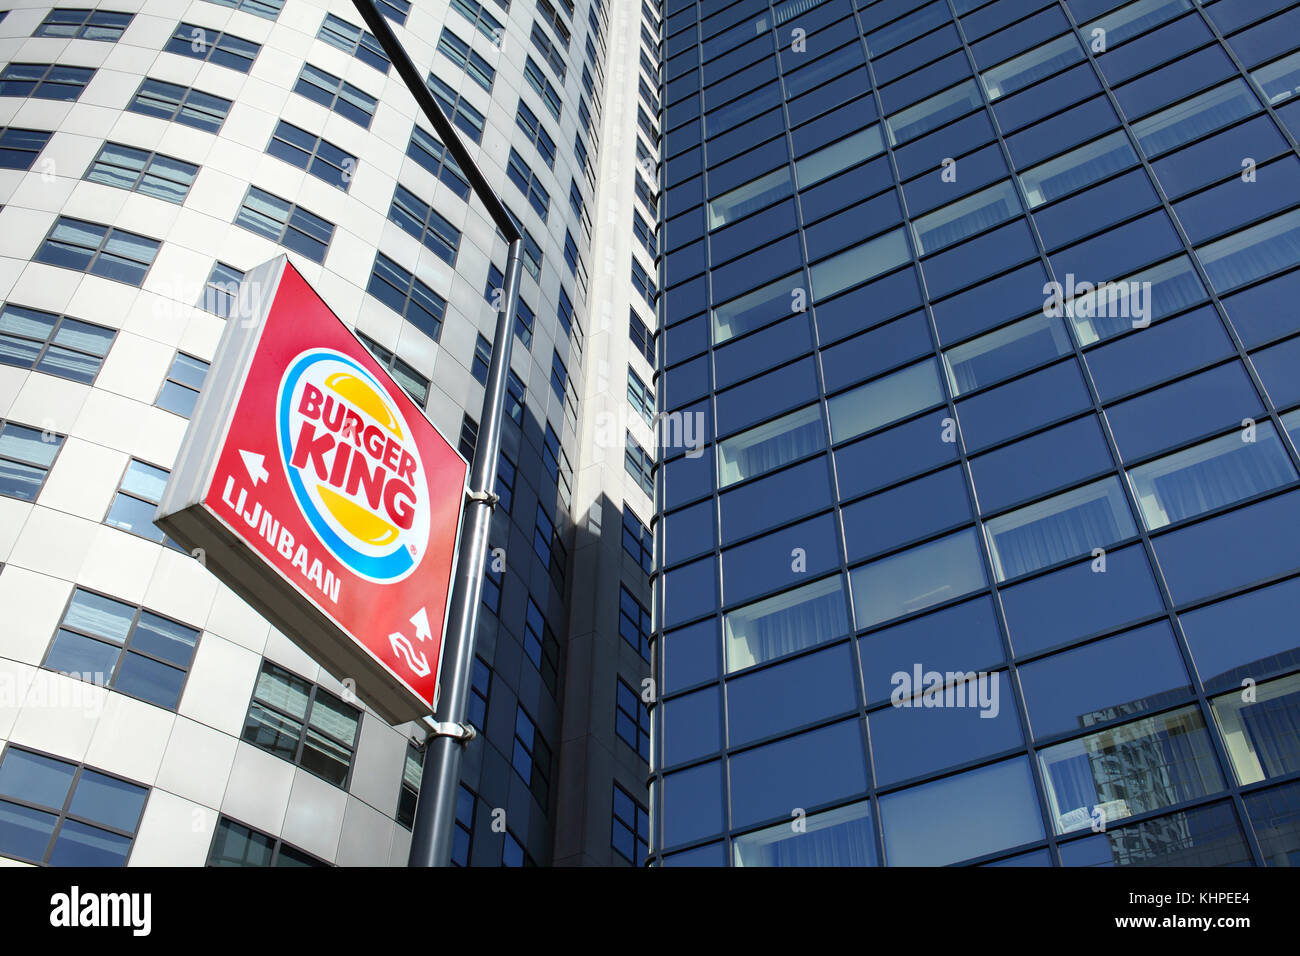 A fast food sign among high rise office blocks on Weena, Rotterdam city centre, The Netherlands. Stock Photo